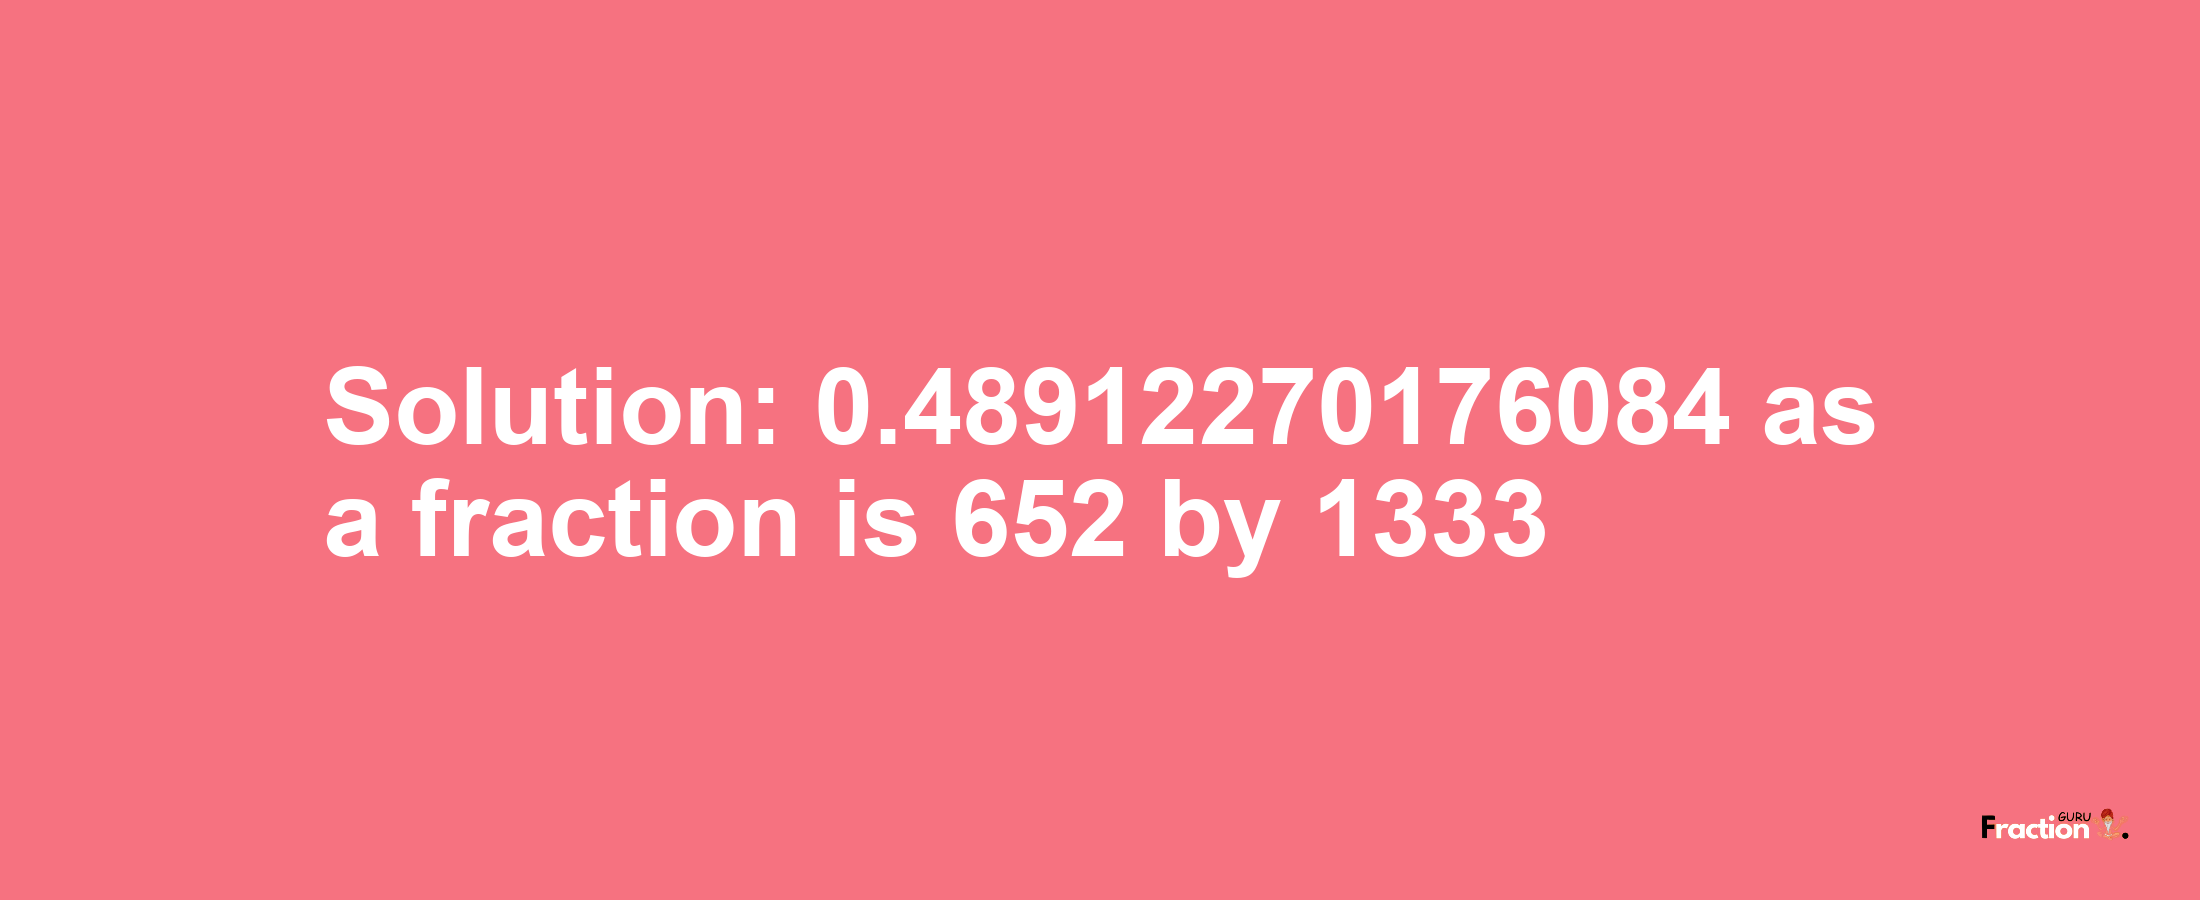 Solution:0.48912270176084 as a fraction is 652/1333